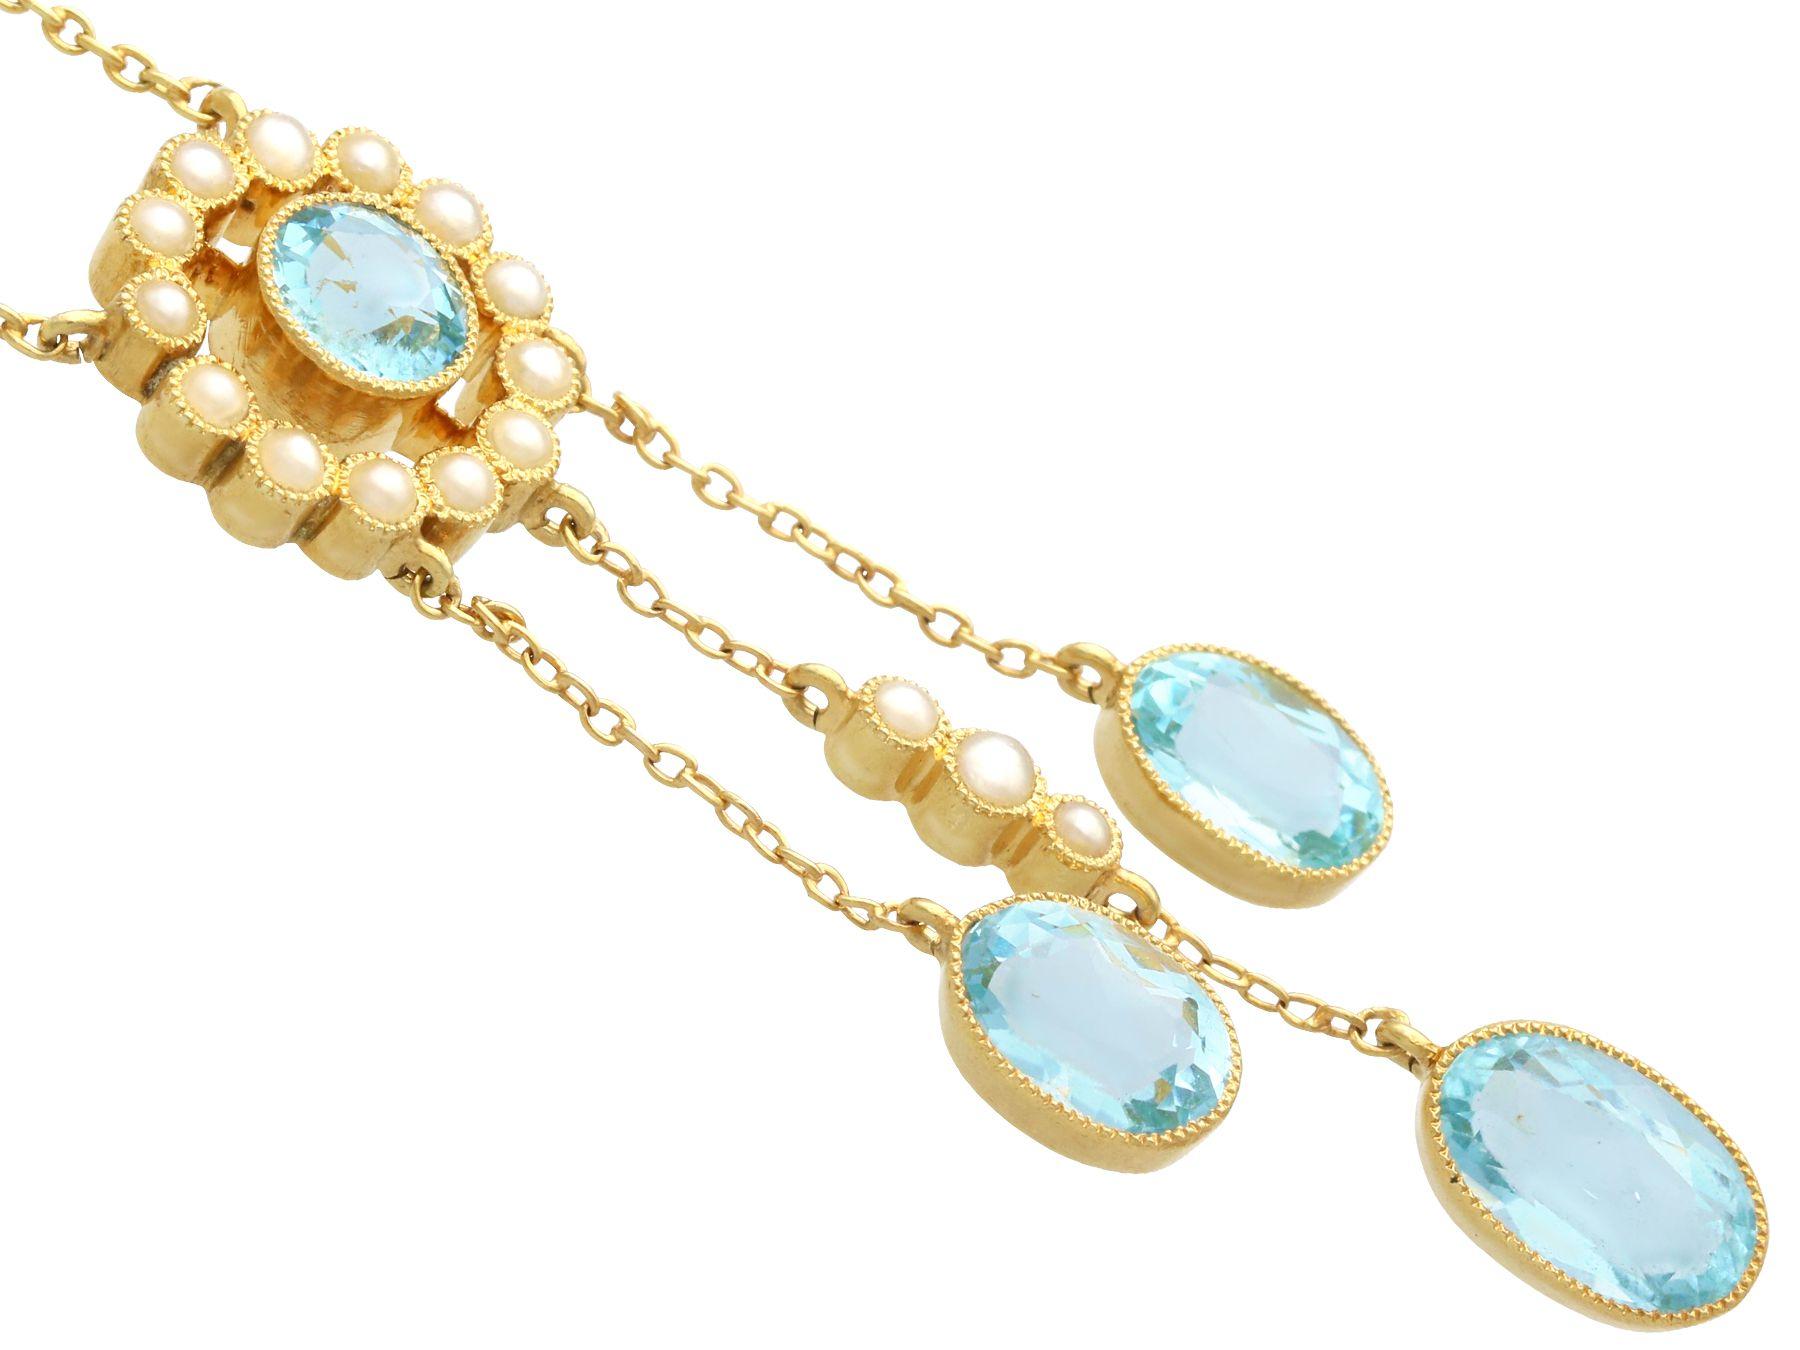 Antique 2.71 Carat Aquamarine and Pearl Yellow Gold Earring and Pendant Set For Sale 1